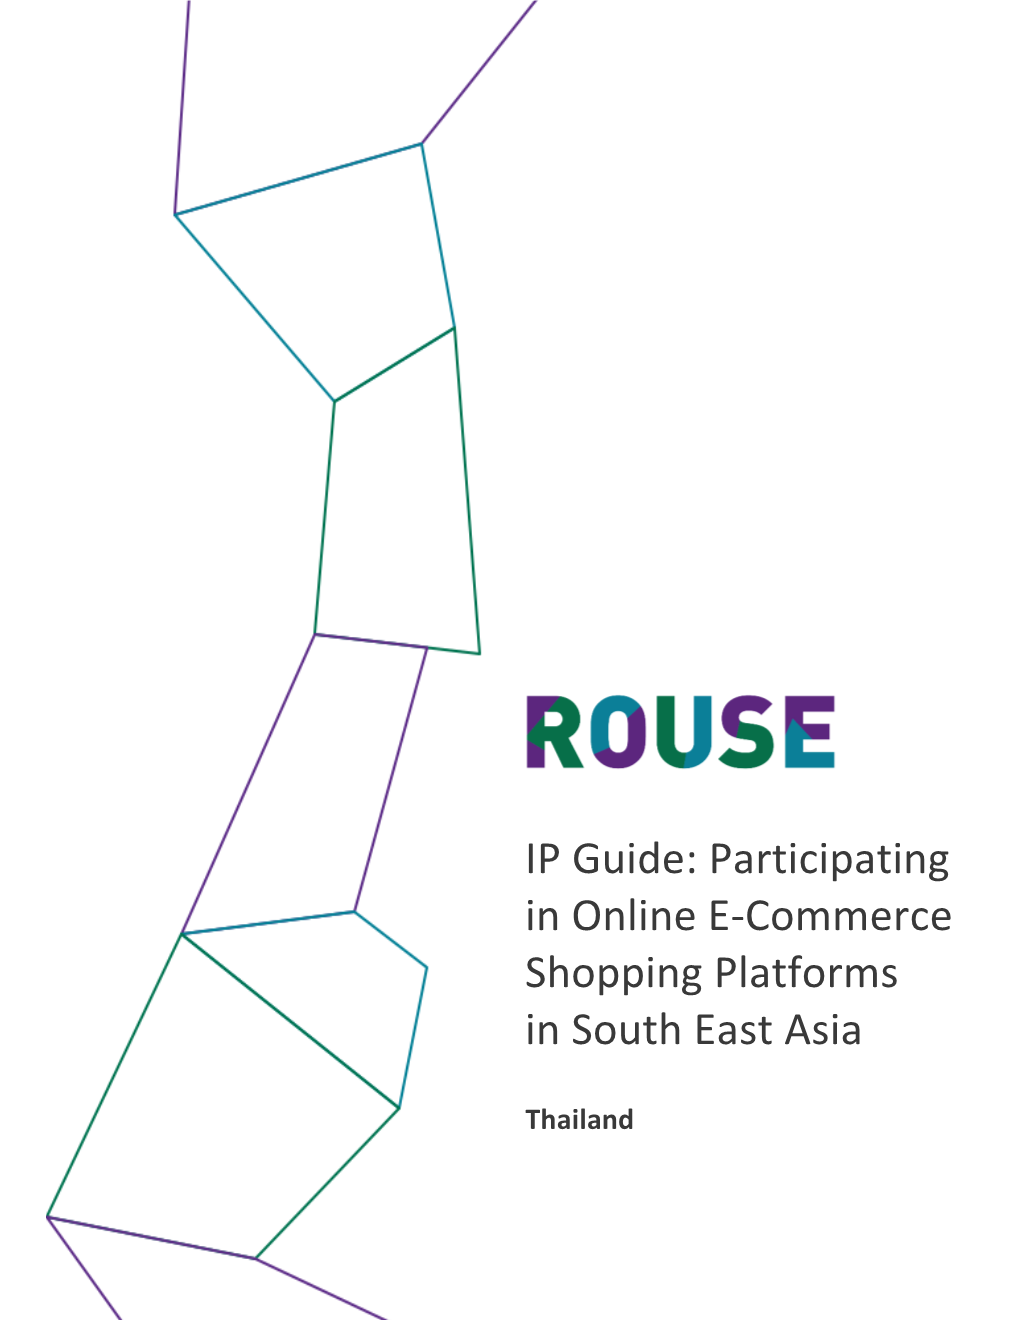 IP Guide: Participating in Online E-Commerce Shopping Platforms in South East Asia